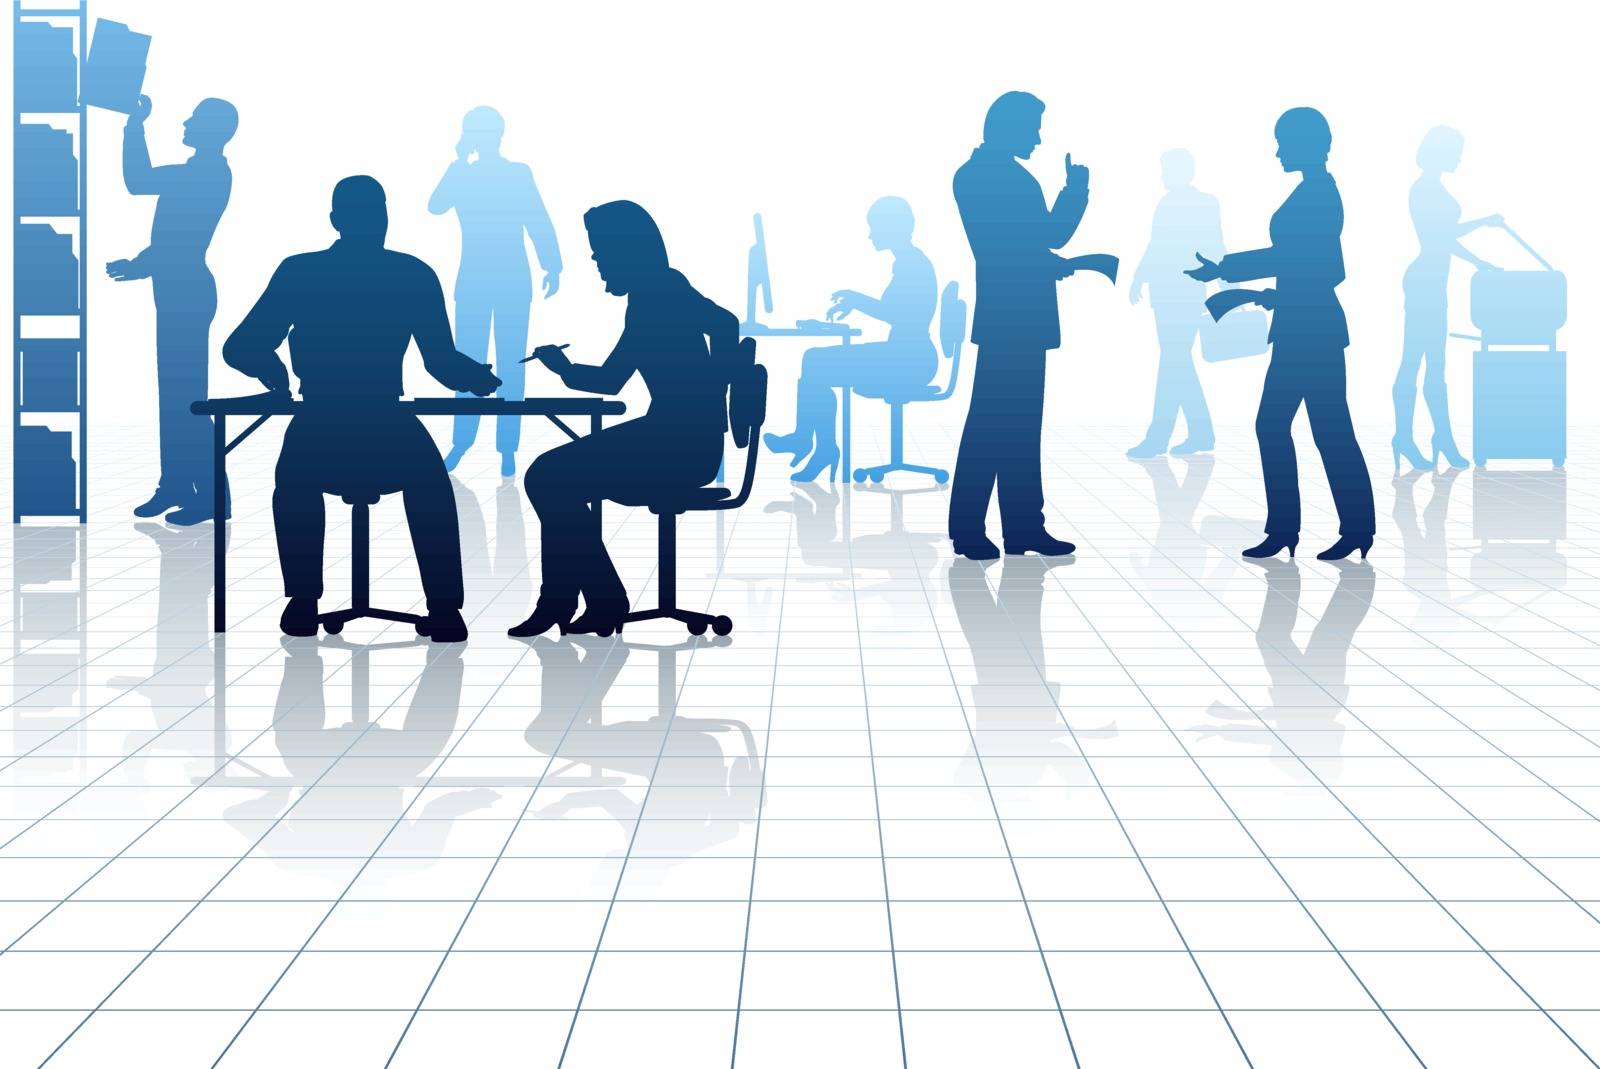 Editable vector silhouettes of people in a busy office with reflections